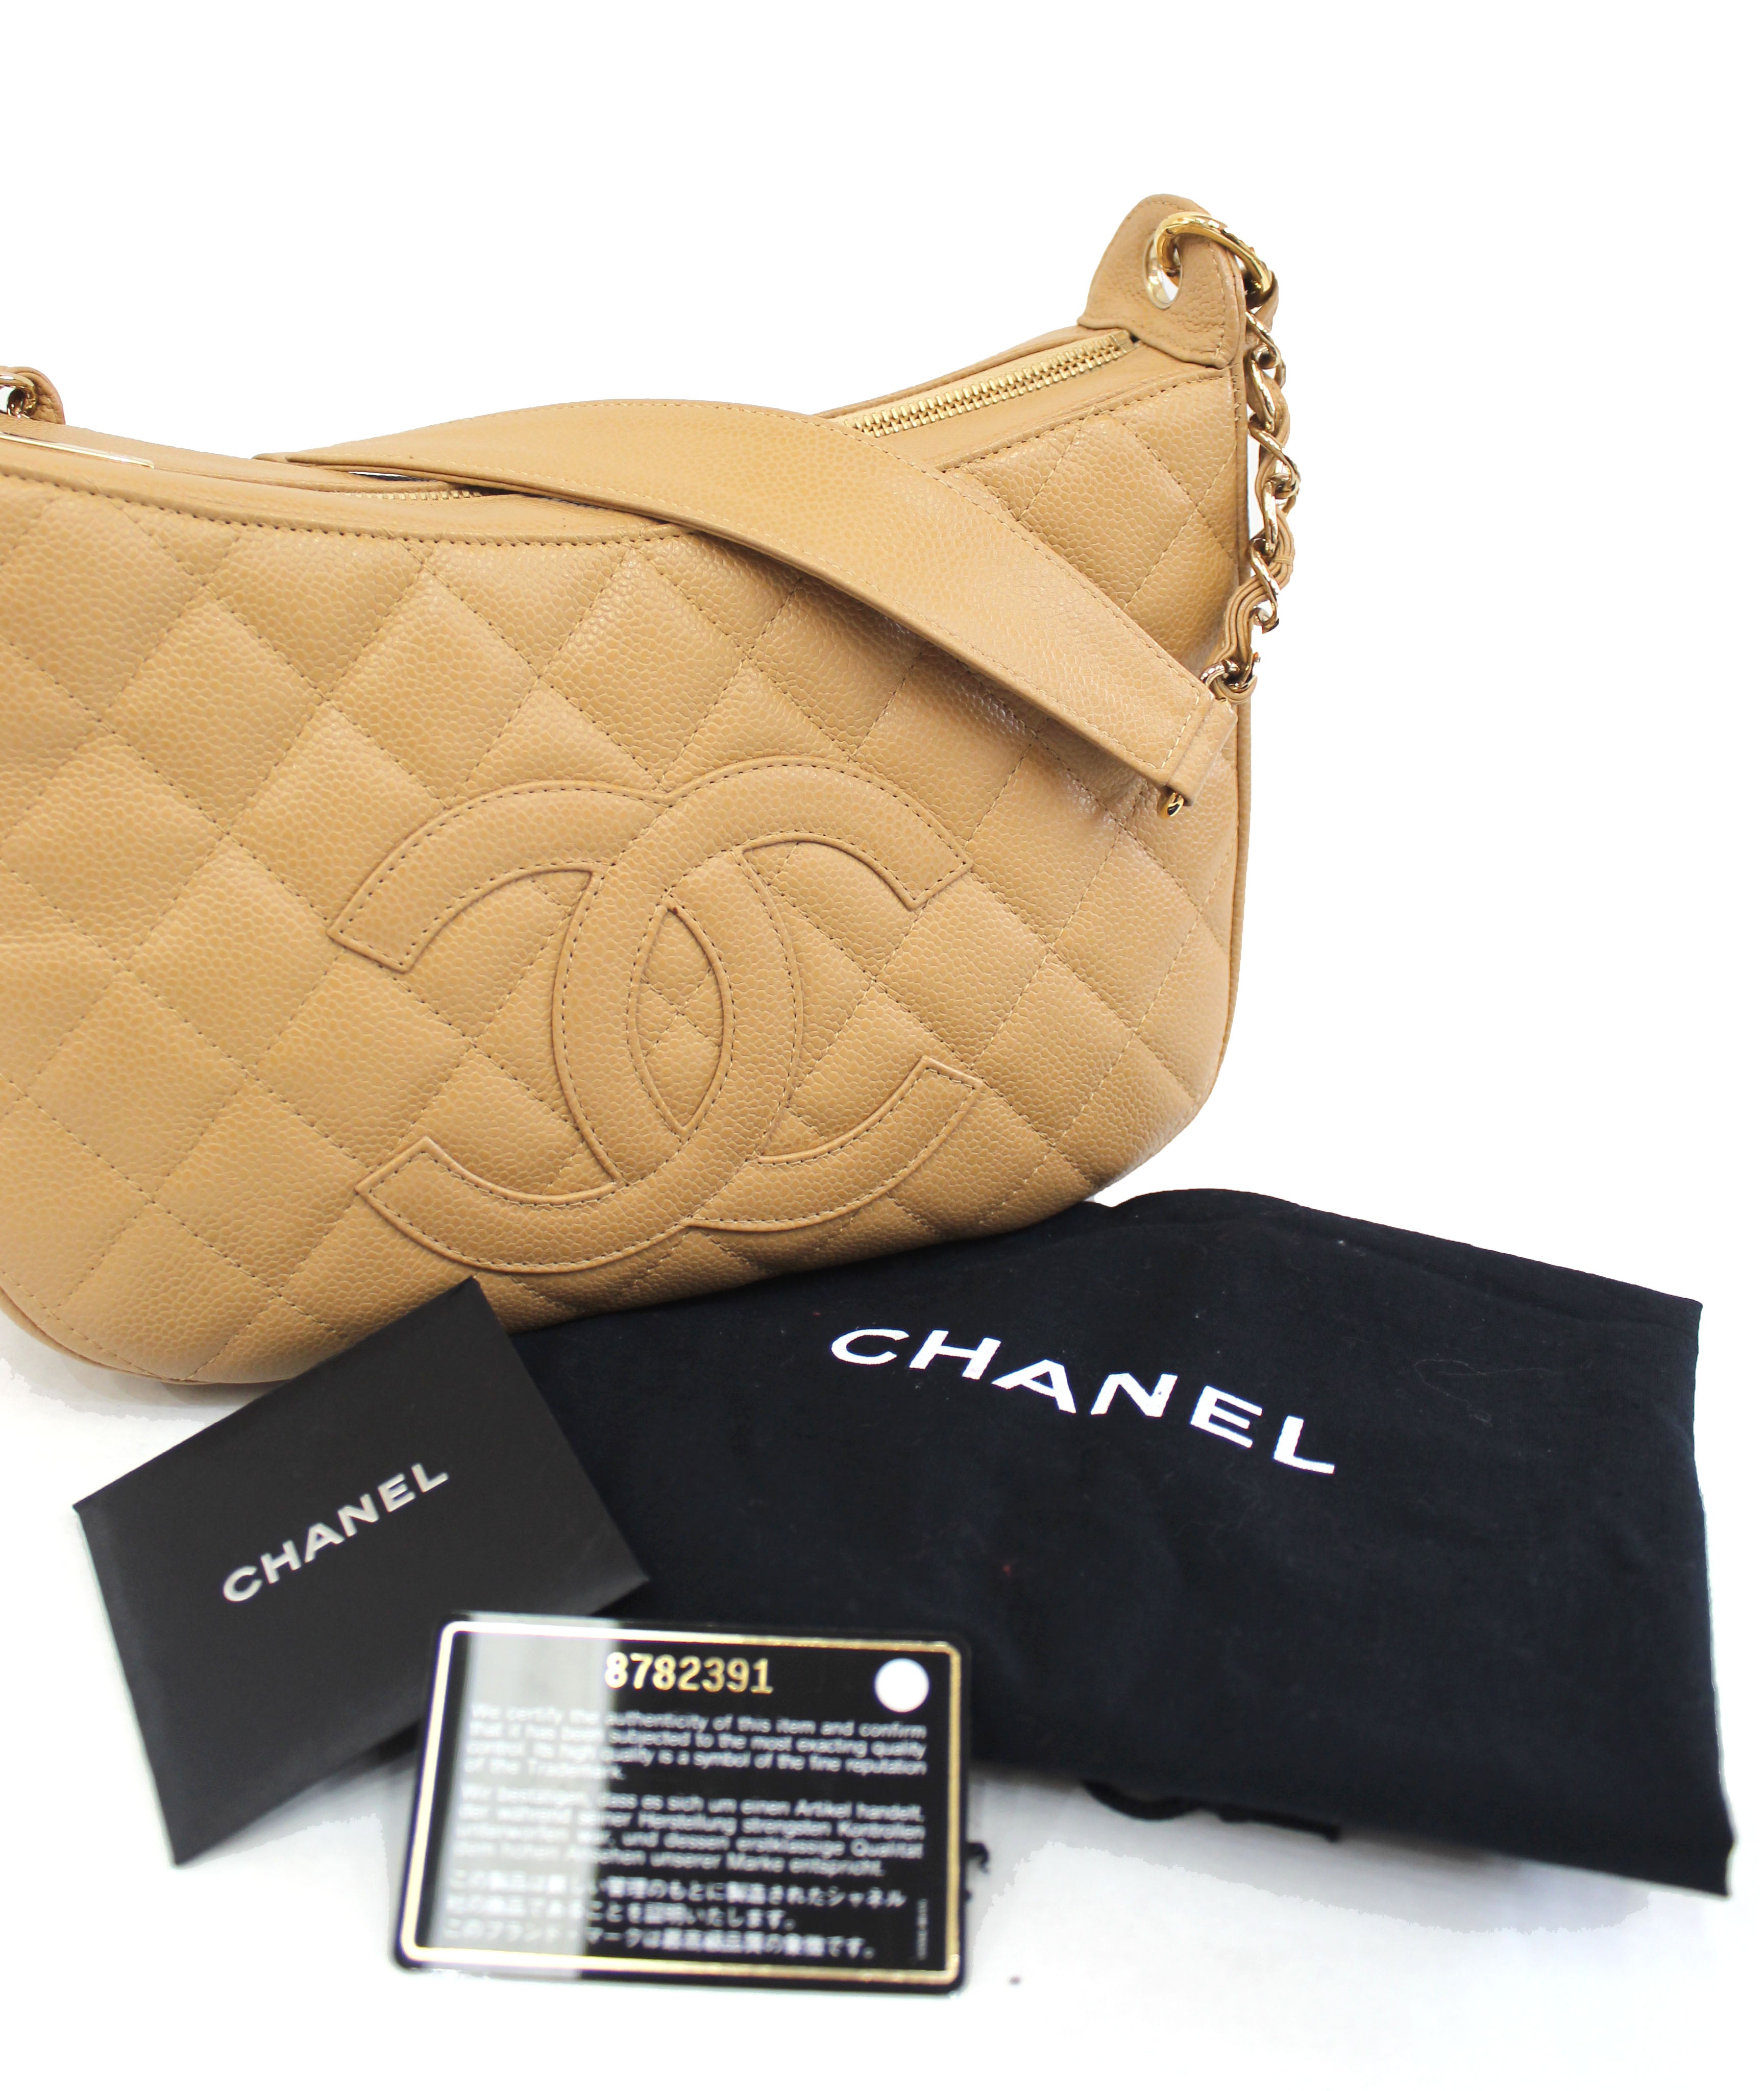 Authentic Chanel Beige Caviar Quilted Leather Hobo Shoulder Bag